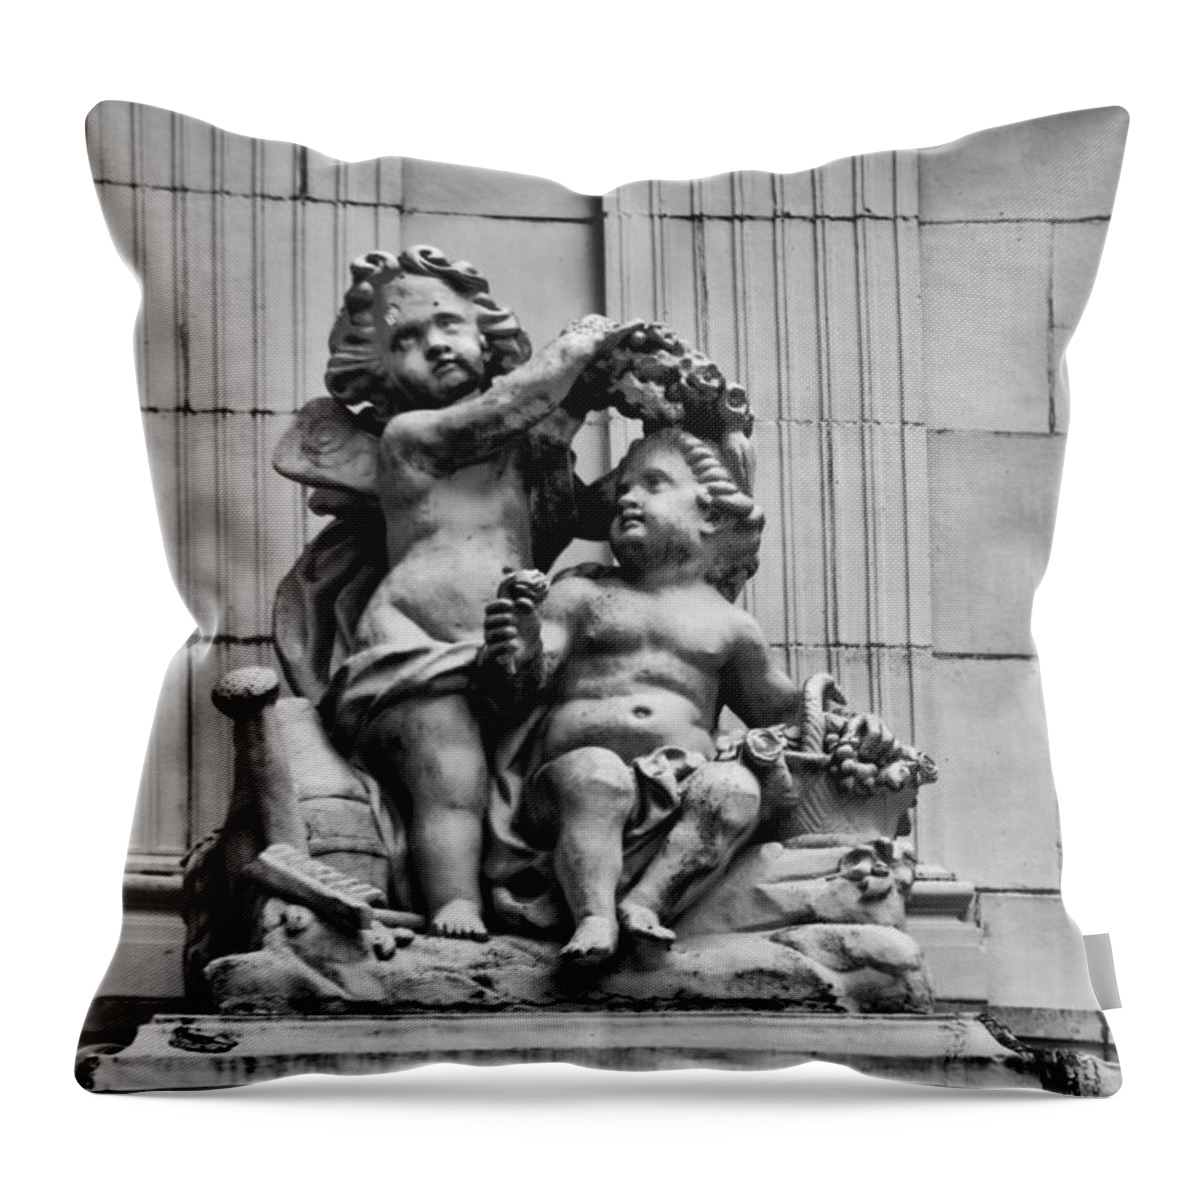 Marble Throw Pillow featuring the photograph Marble House Cherubs - Neport Rhode Island by Bill Cannon